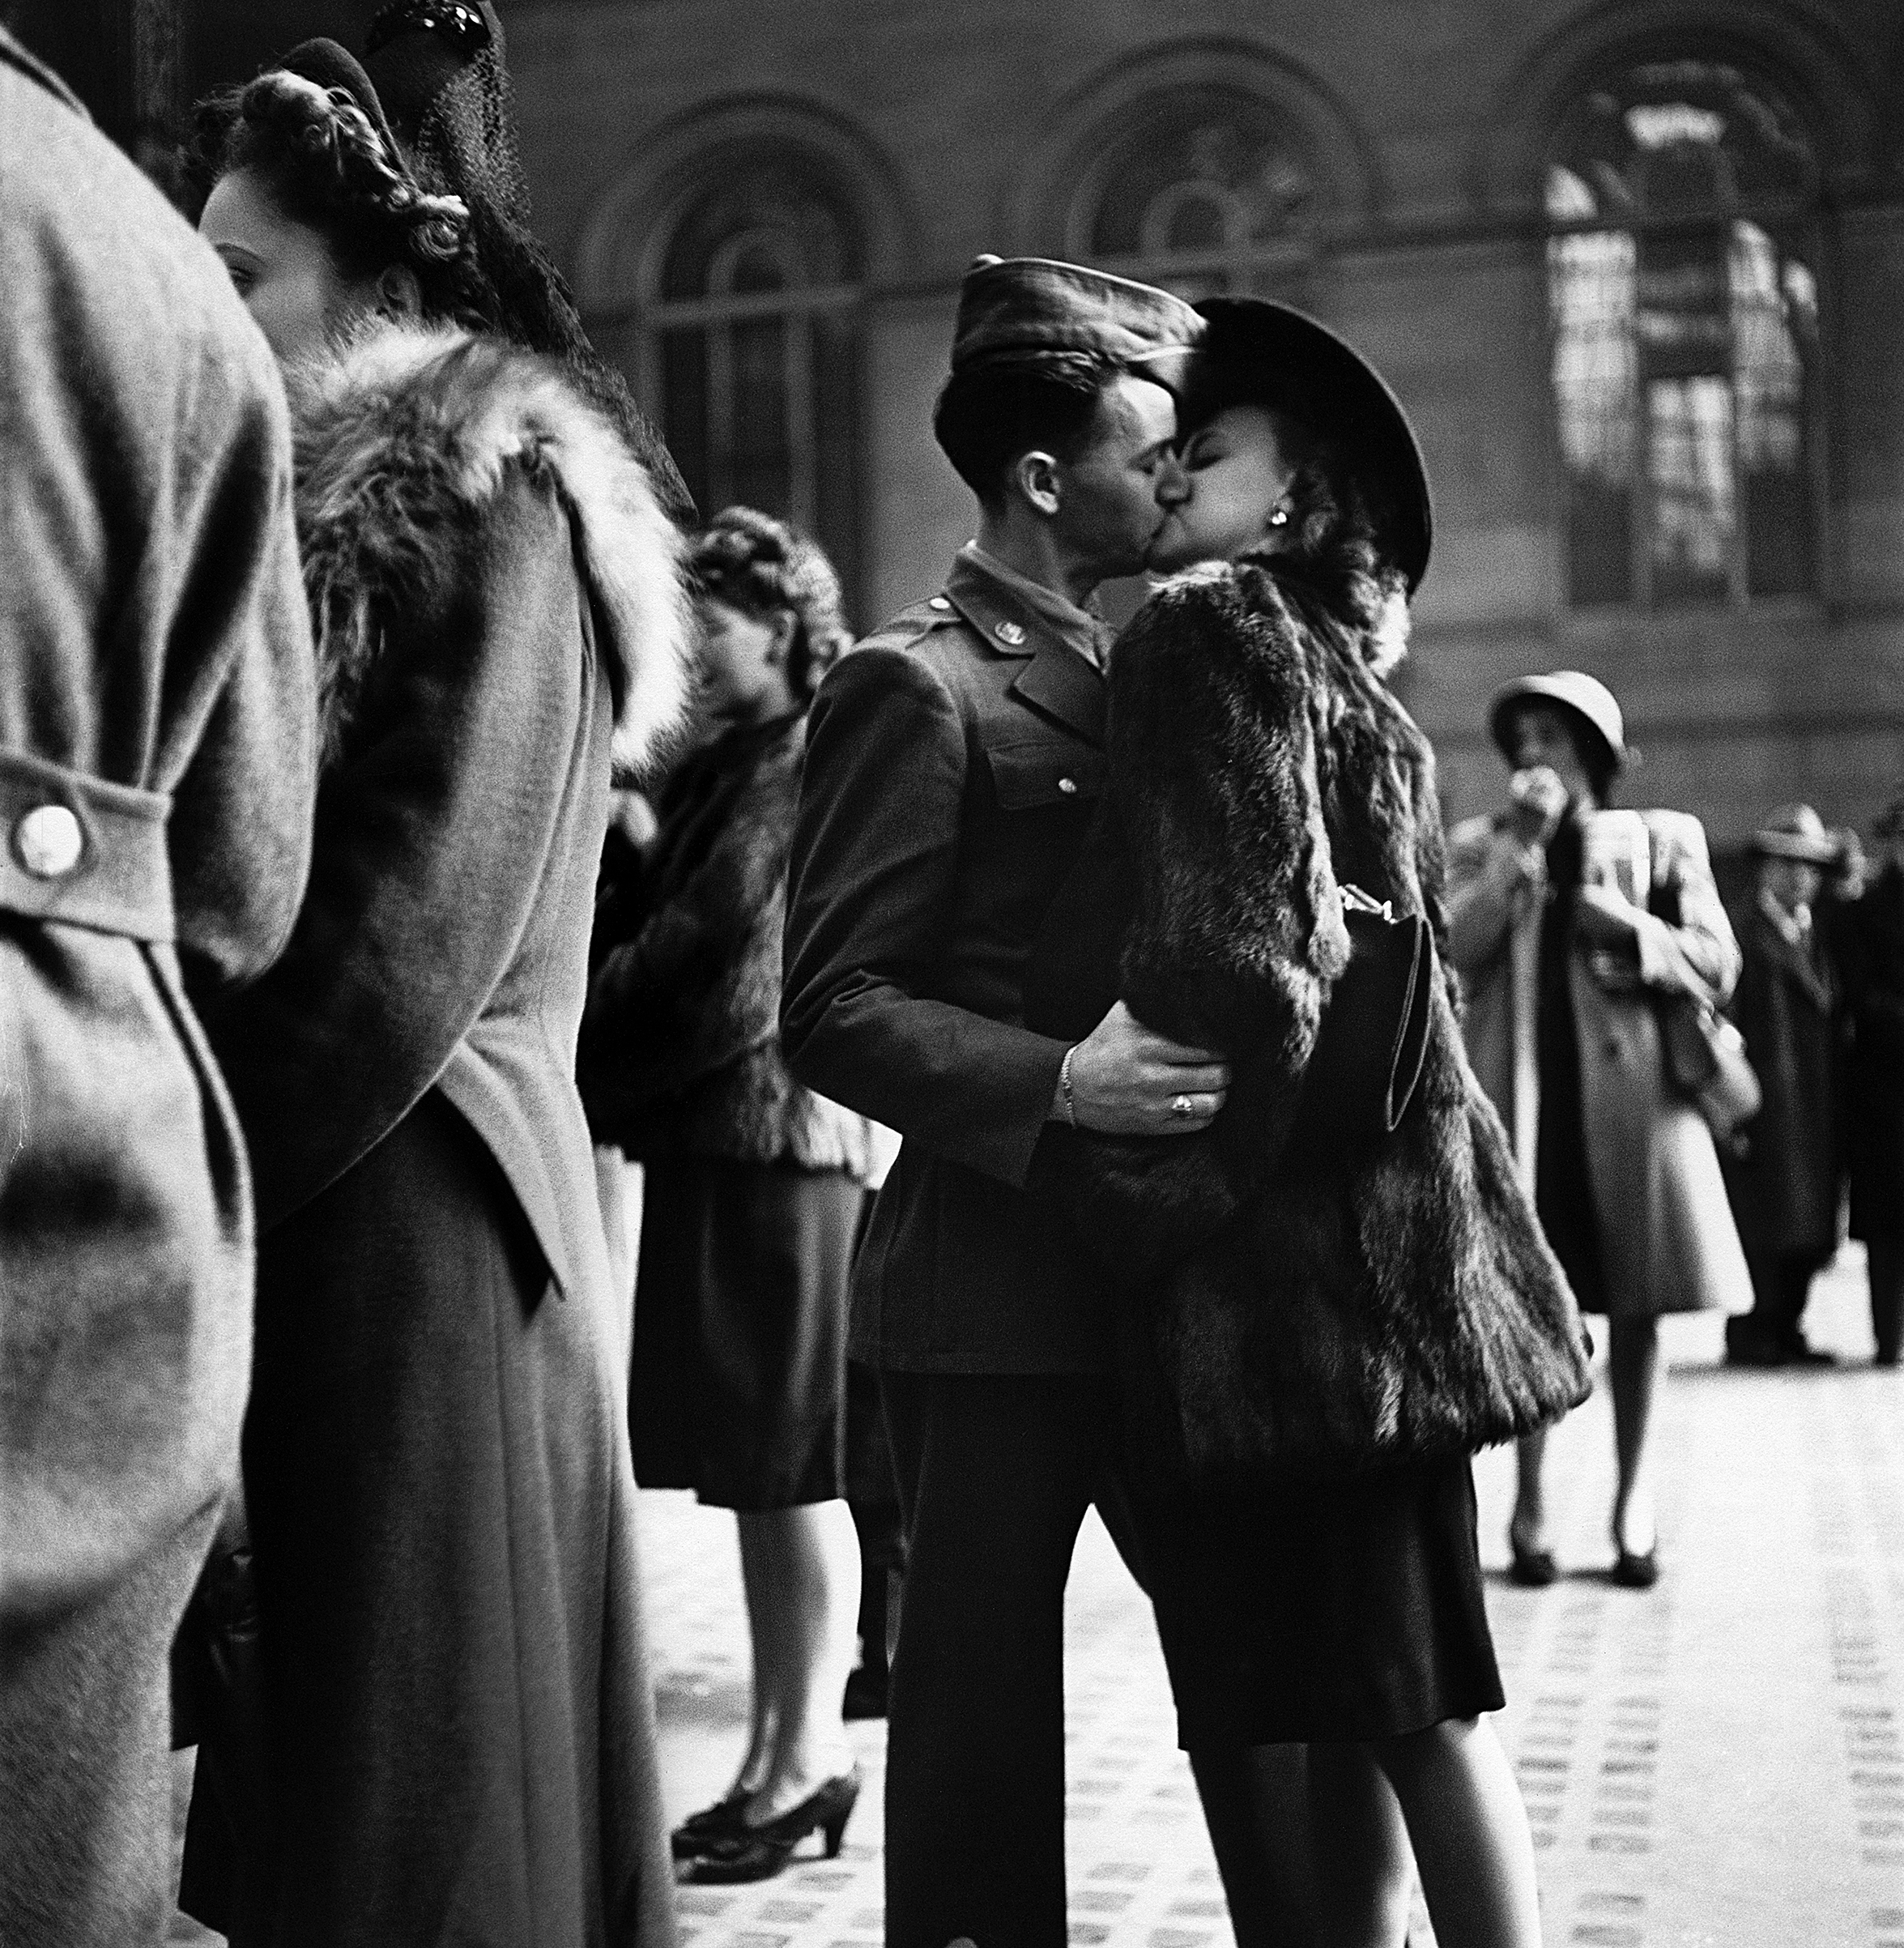 Couple in Penn Station sharing farewell kiss before he ships off to war during WWII. 1943.